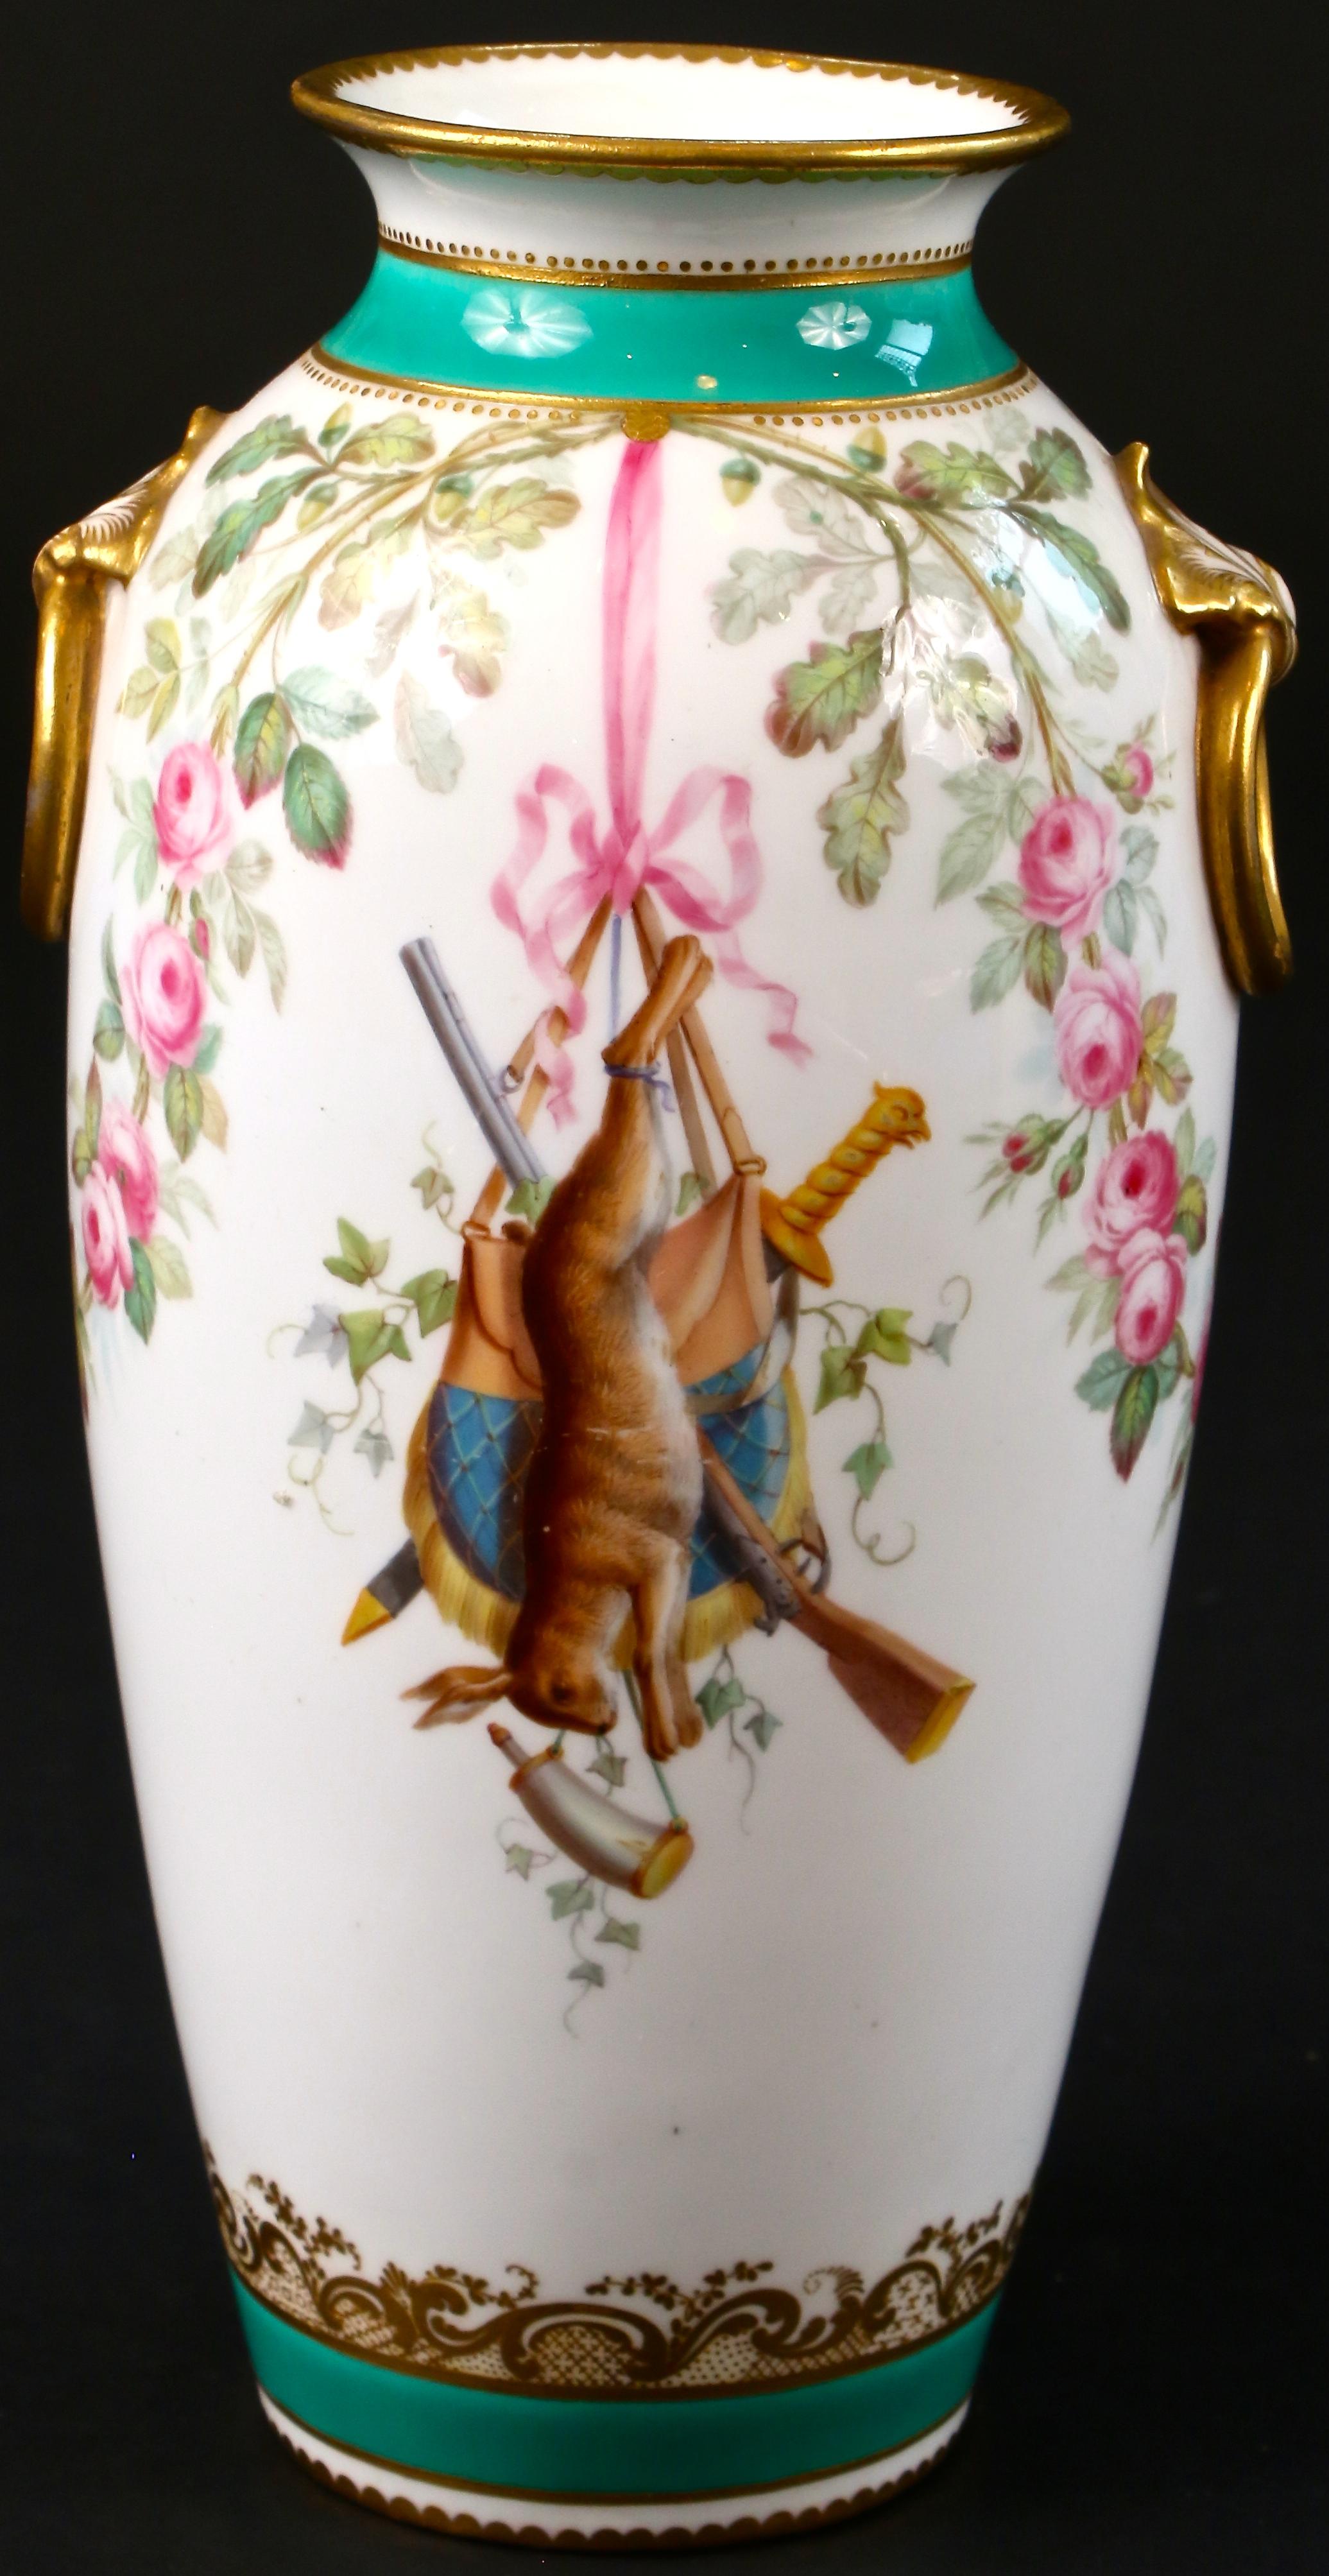 Here is a charming pair of hand painted trophy vases by Minton, Stoke-on-Trent, England. The painting on these vases exhibits a high level of artistry:
- a strung-up hare, rifle, hunting bag and sword, 
- 2 trophies of game birds hanging by their